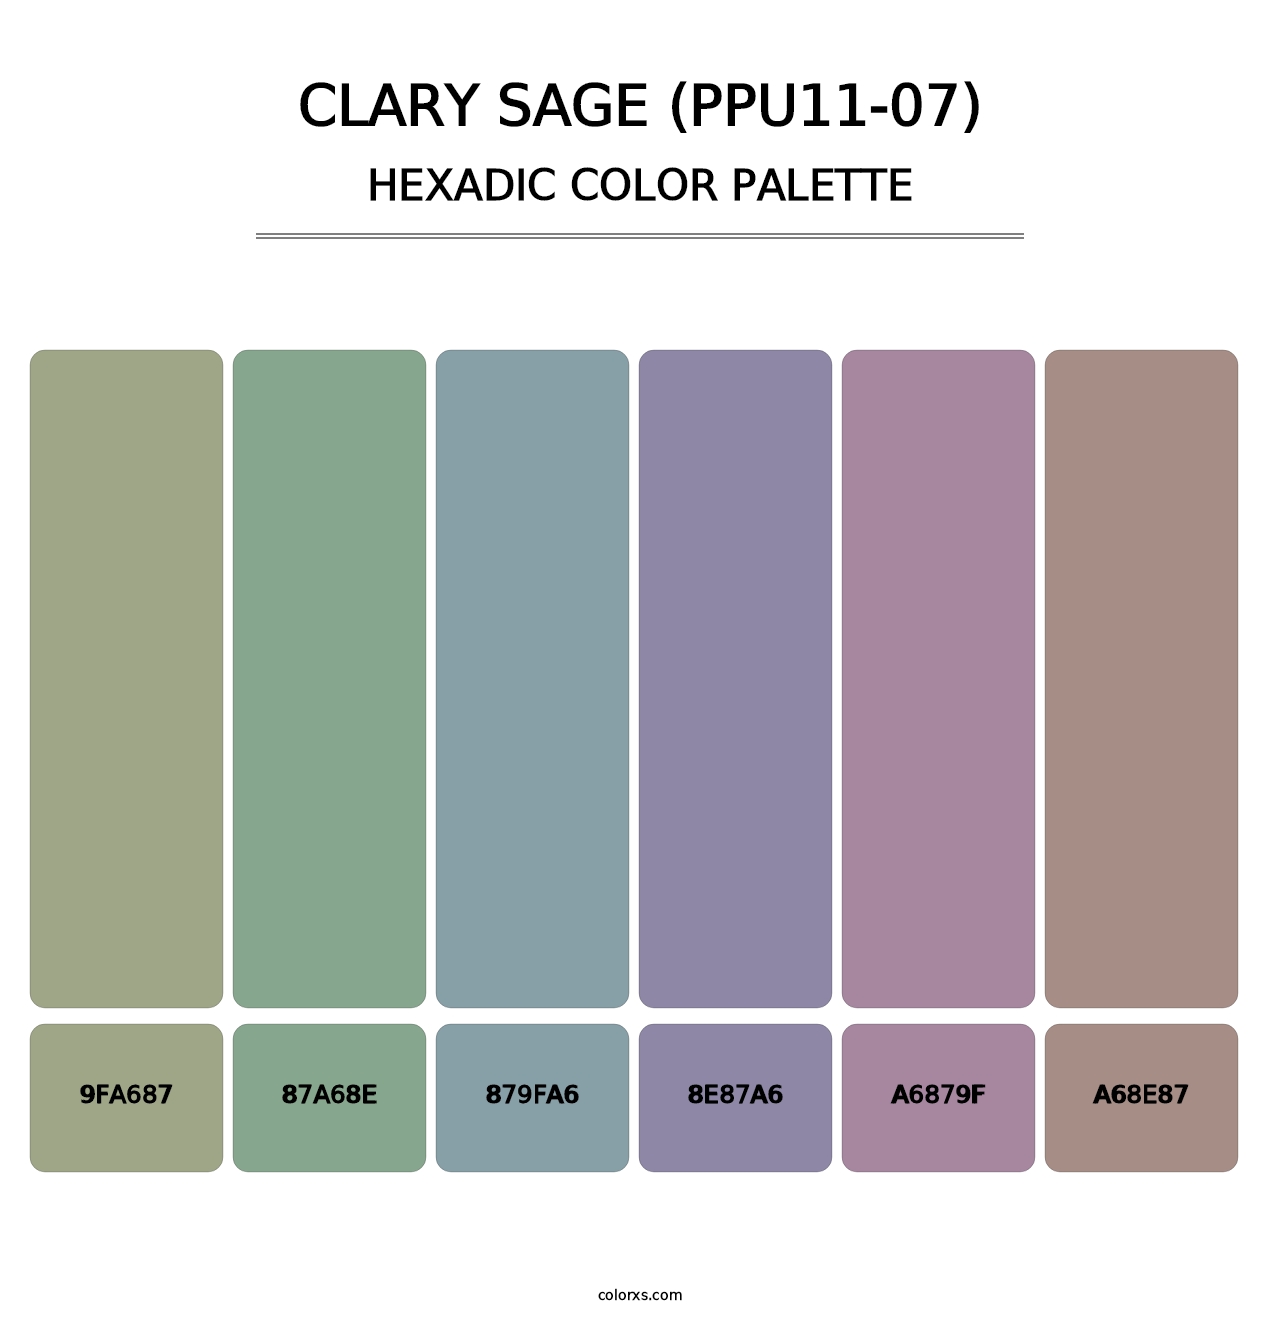 Clary Sage (PPU11-07) - Hexadic Color Palette